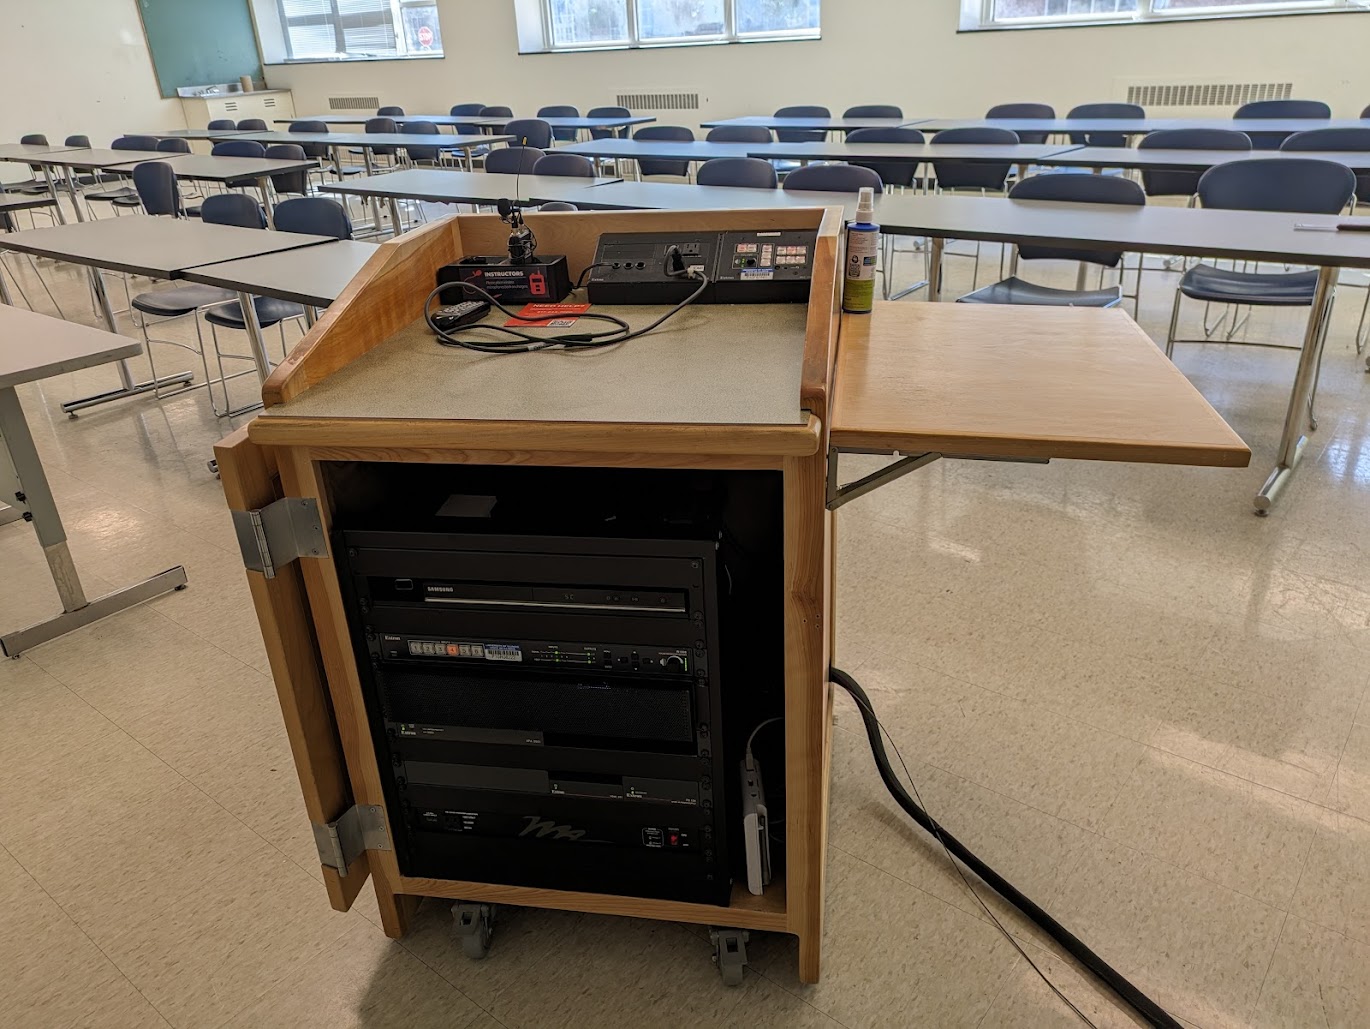 A view of the open cabinet with HDMI input, Rechargeable Wireless Microphone, DVD Player, a push button controller, and audio visual rack.